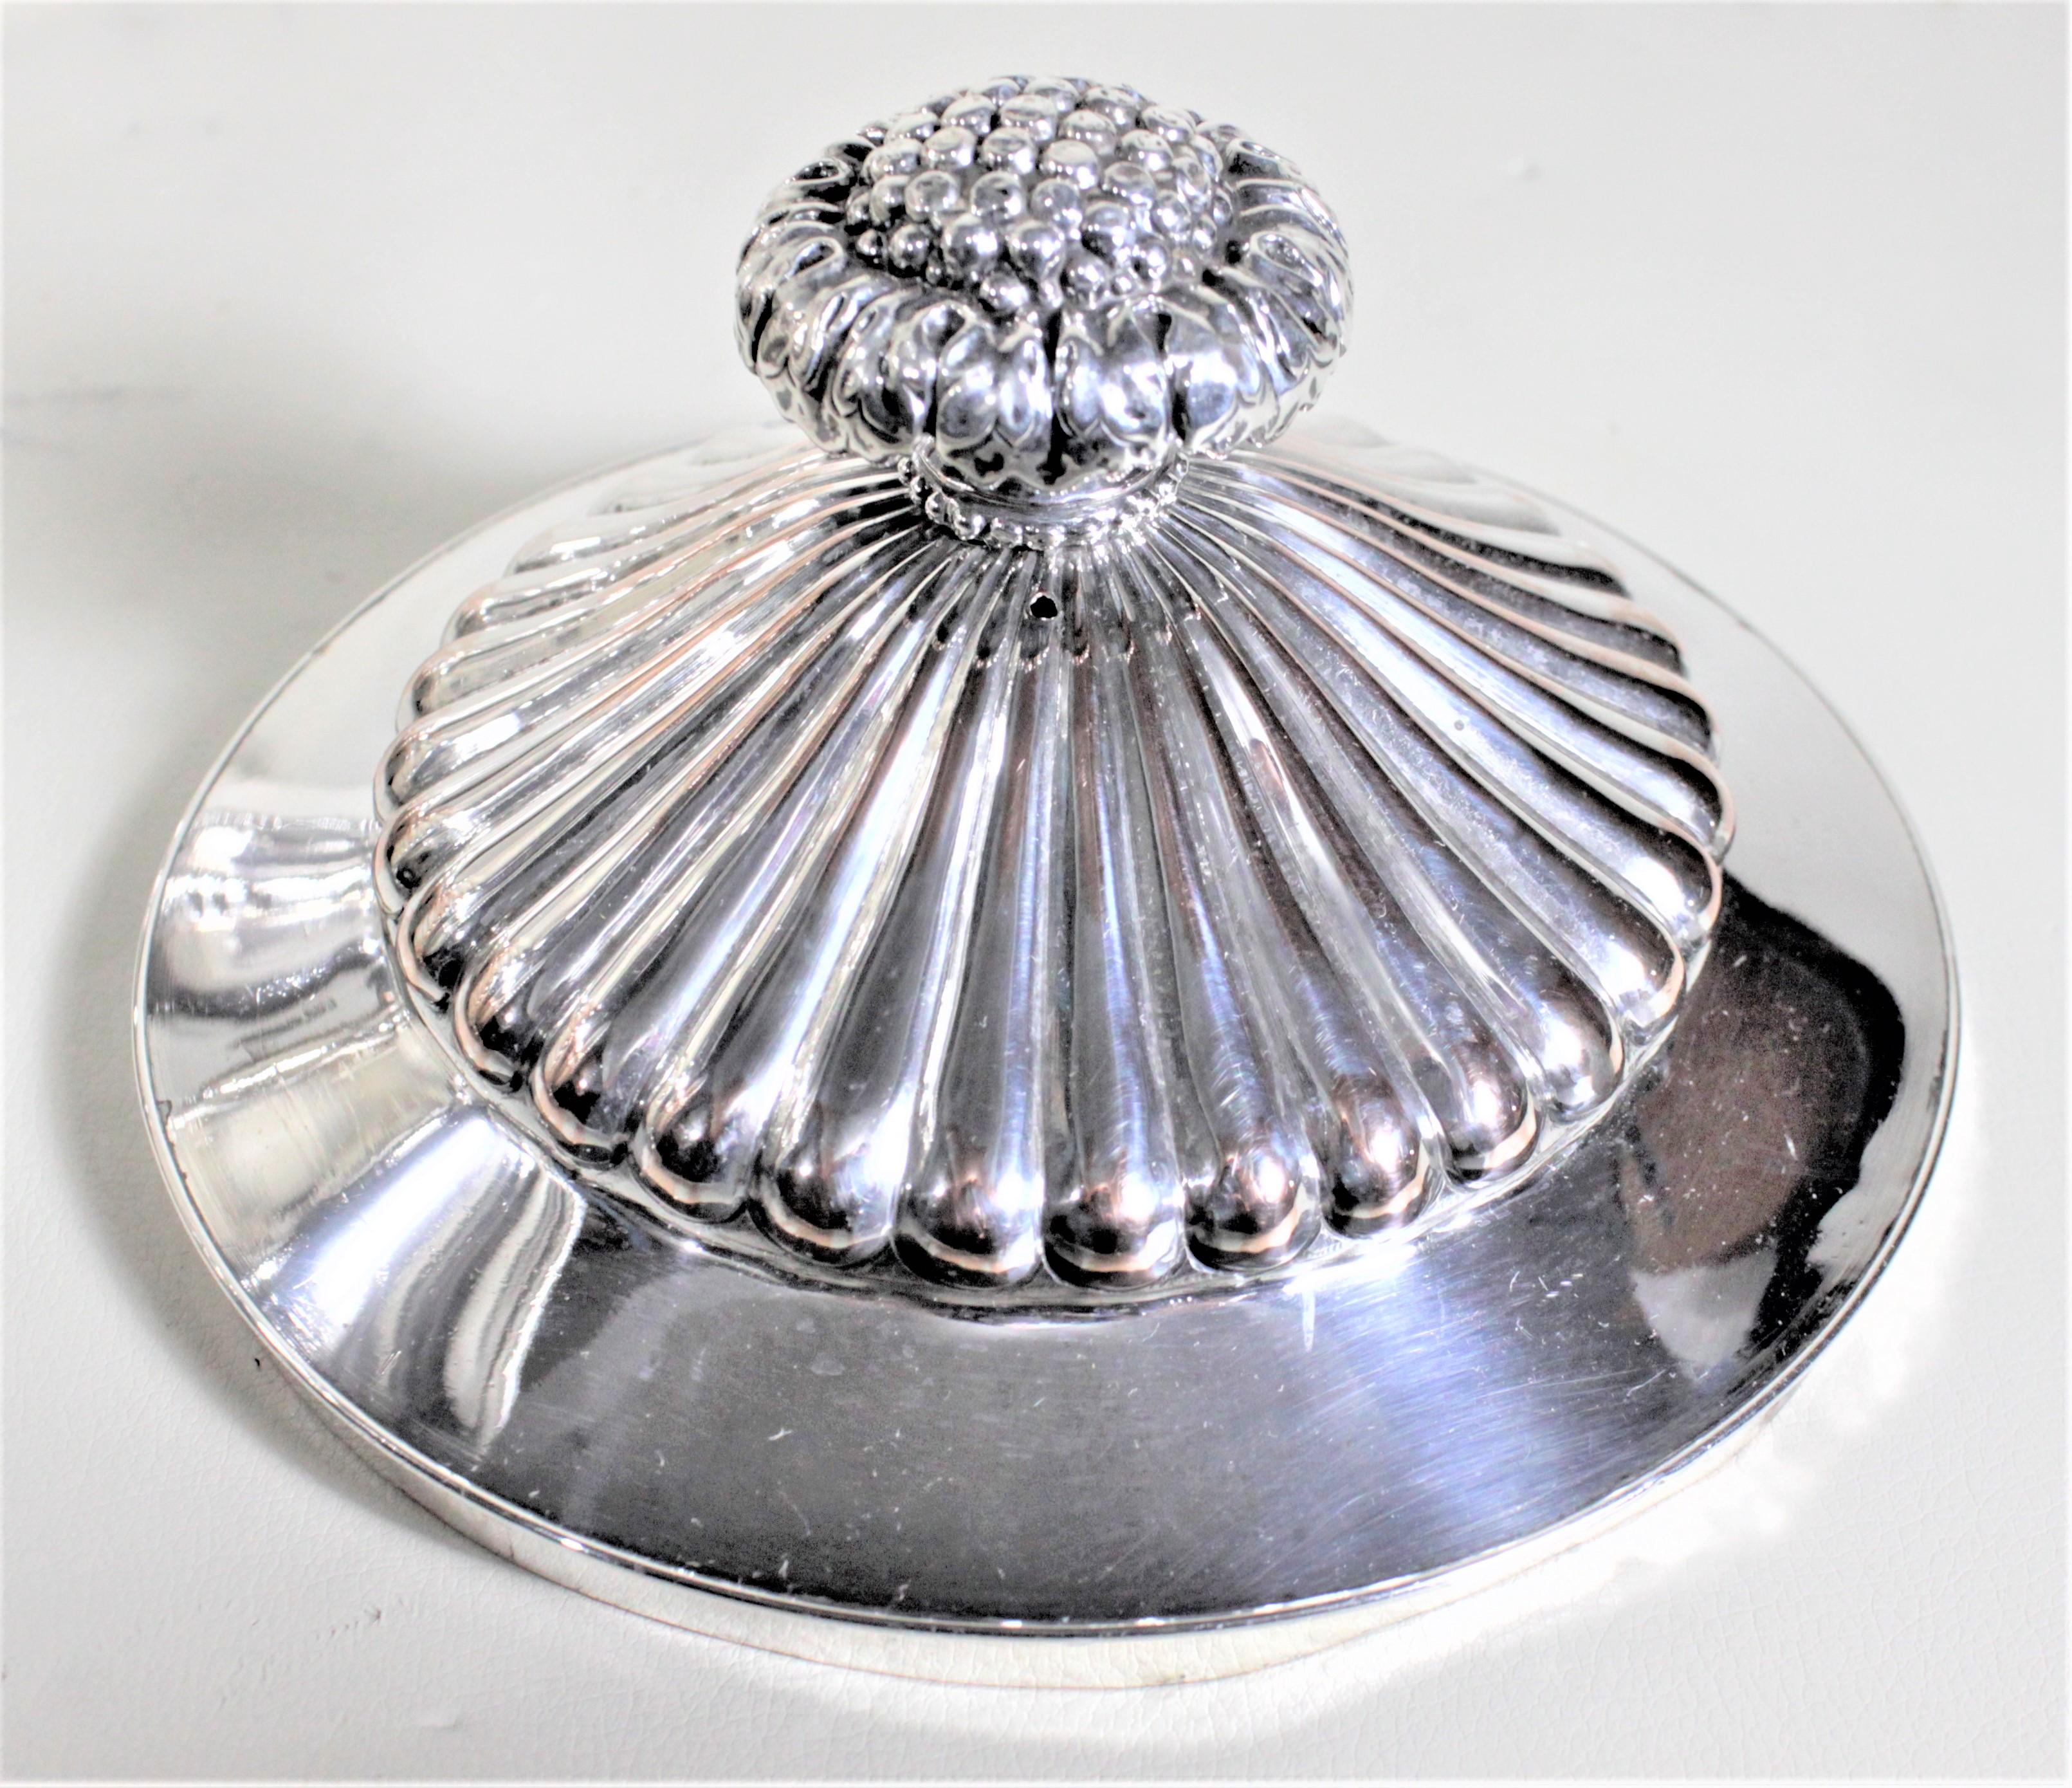 Antique Silver Plated Hot Water or Coffee Claw Foot Pedestal Server or Urn In Good Condition For Sale In Hamilton, Ontario